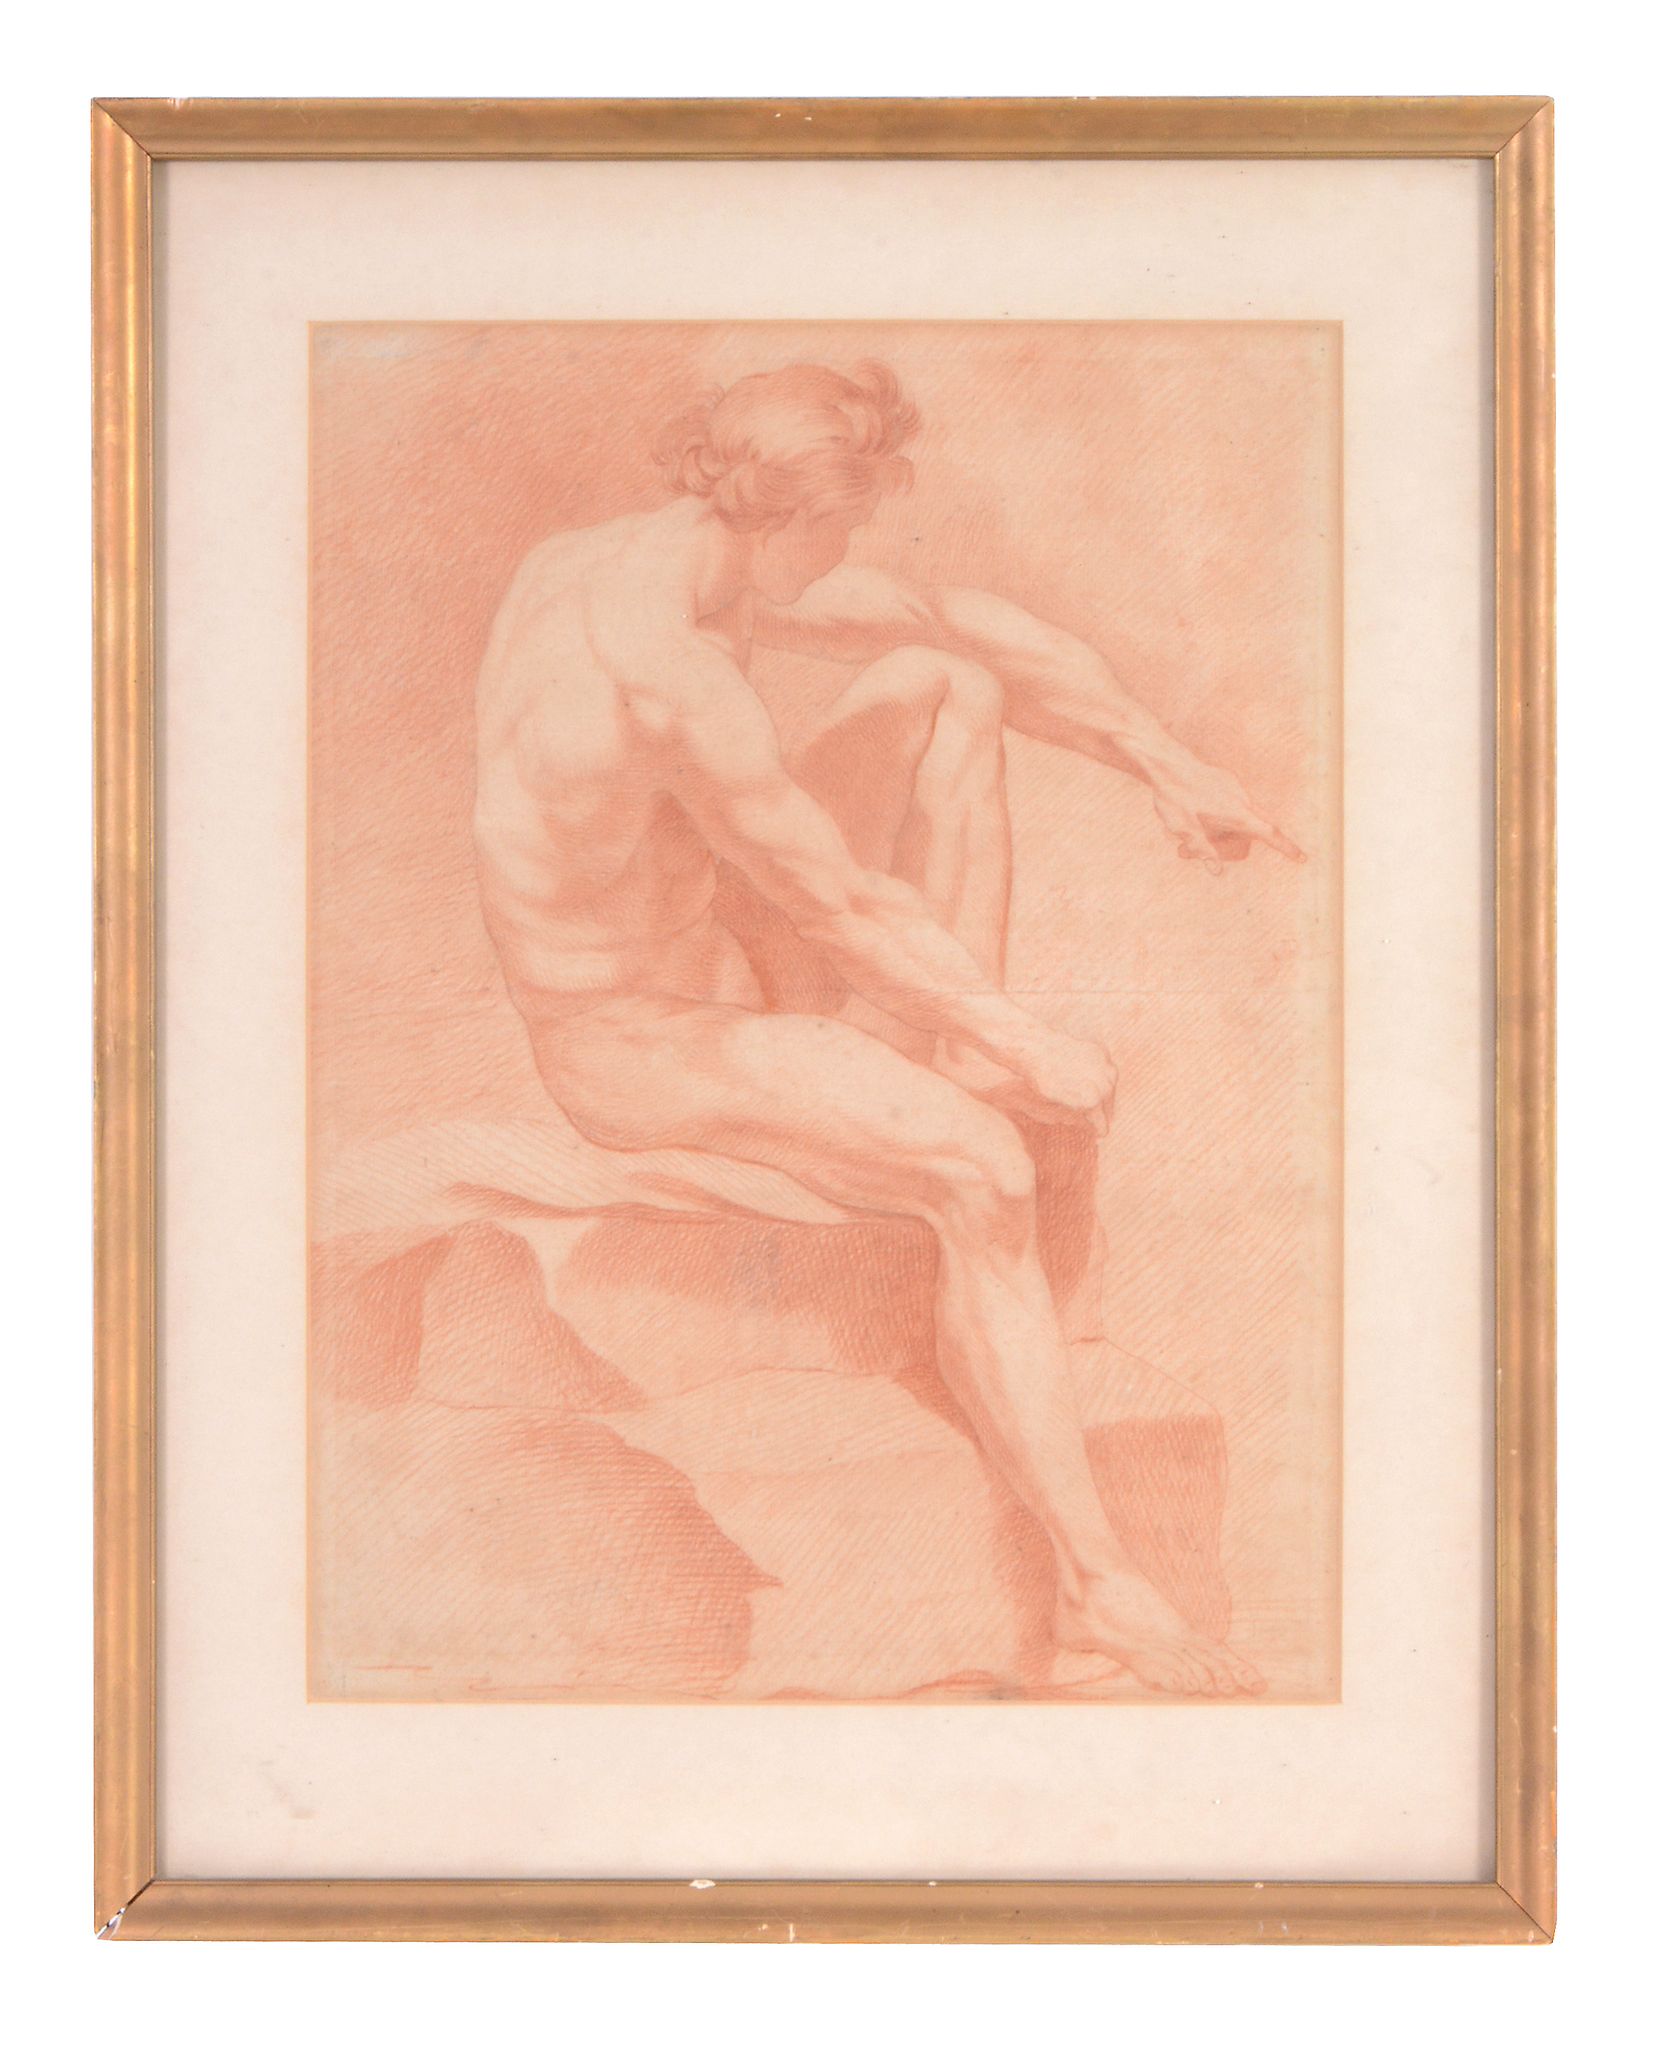 Attributed to George Ruff the Younger (1859-1913) - Study of male nude, sat on a rocky ledge  Red - Image 2 of 3